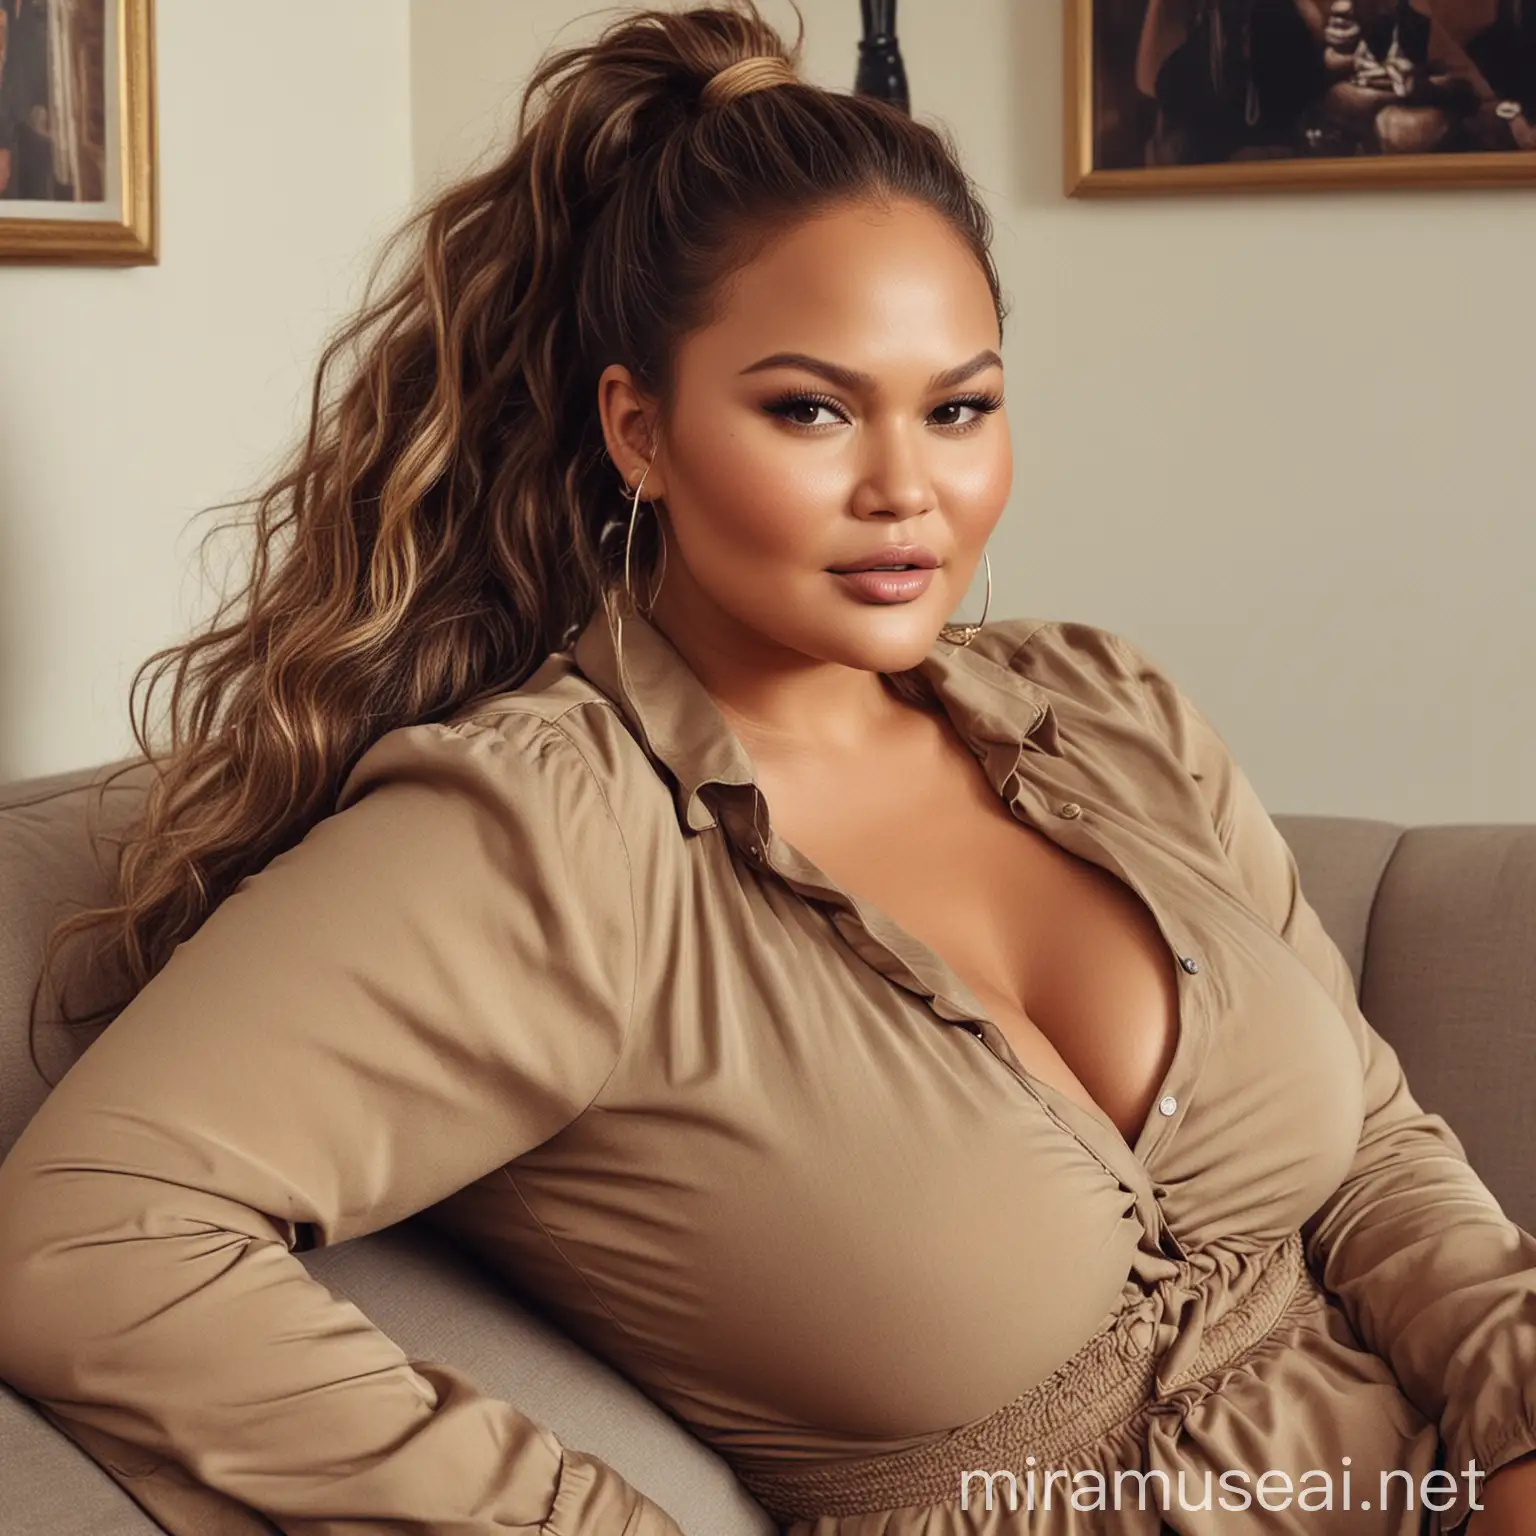 Chrissy Teigen on the couch, wearing a tight shirt, bbw, big long kinky hair in a ponytail, showing massive cleavage, giant breasts
